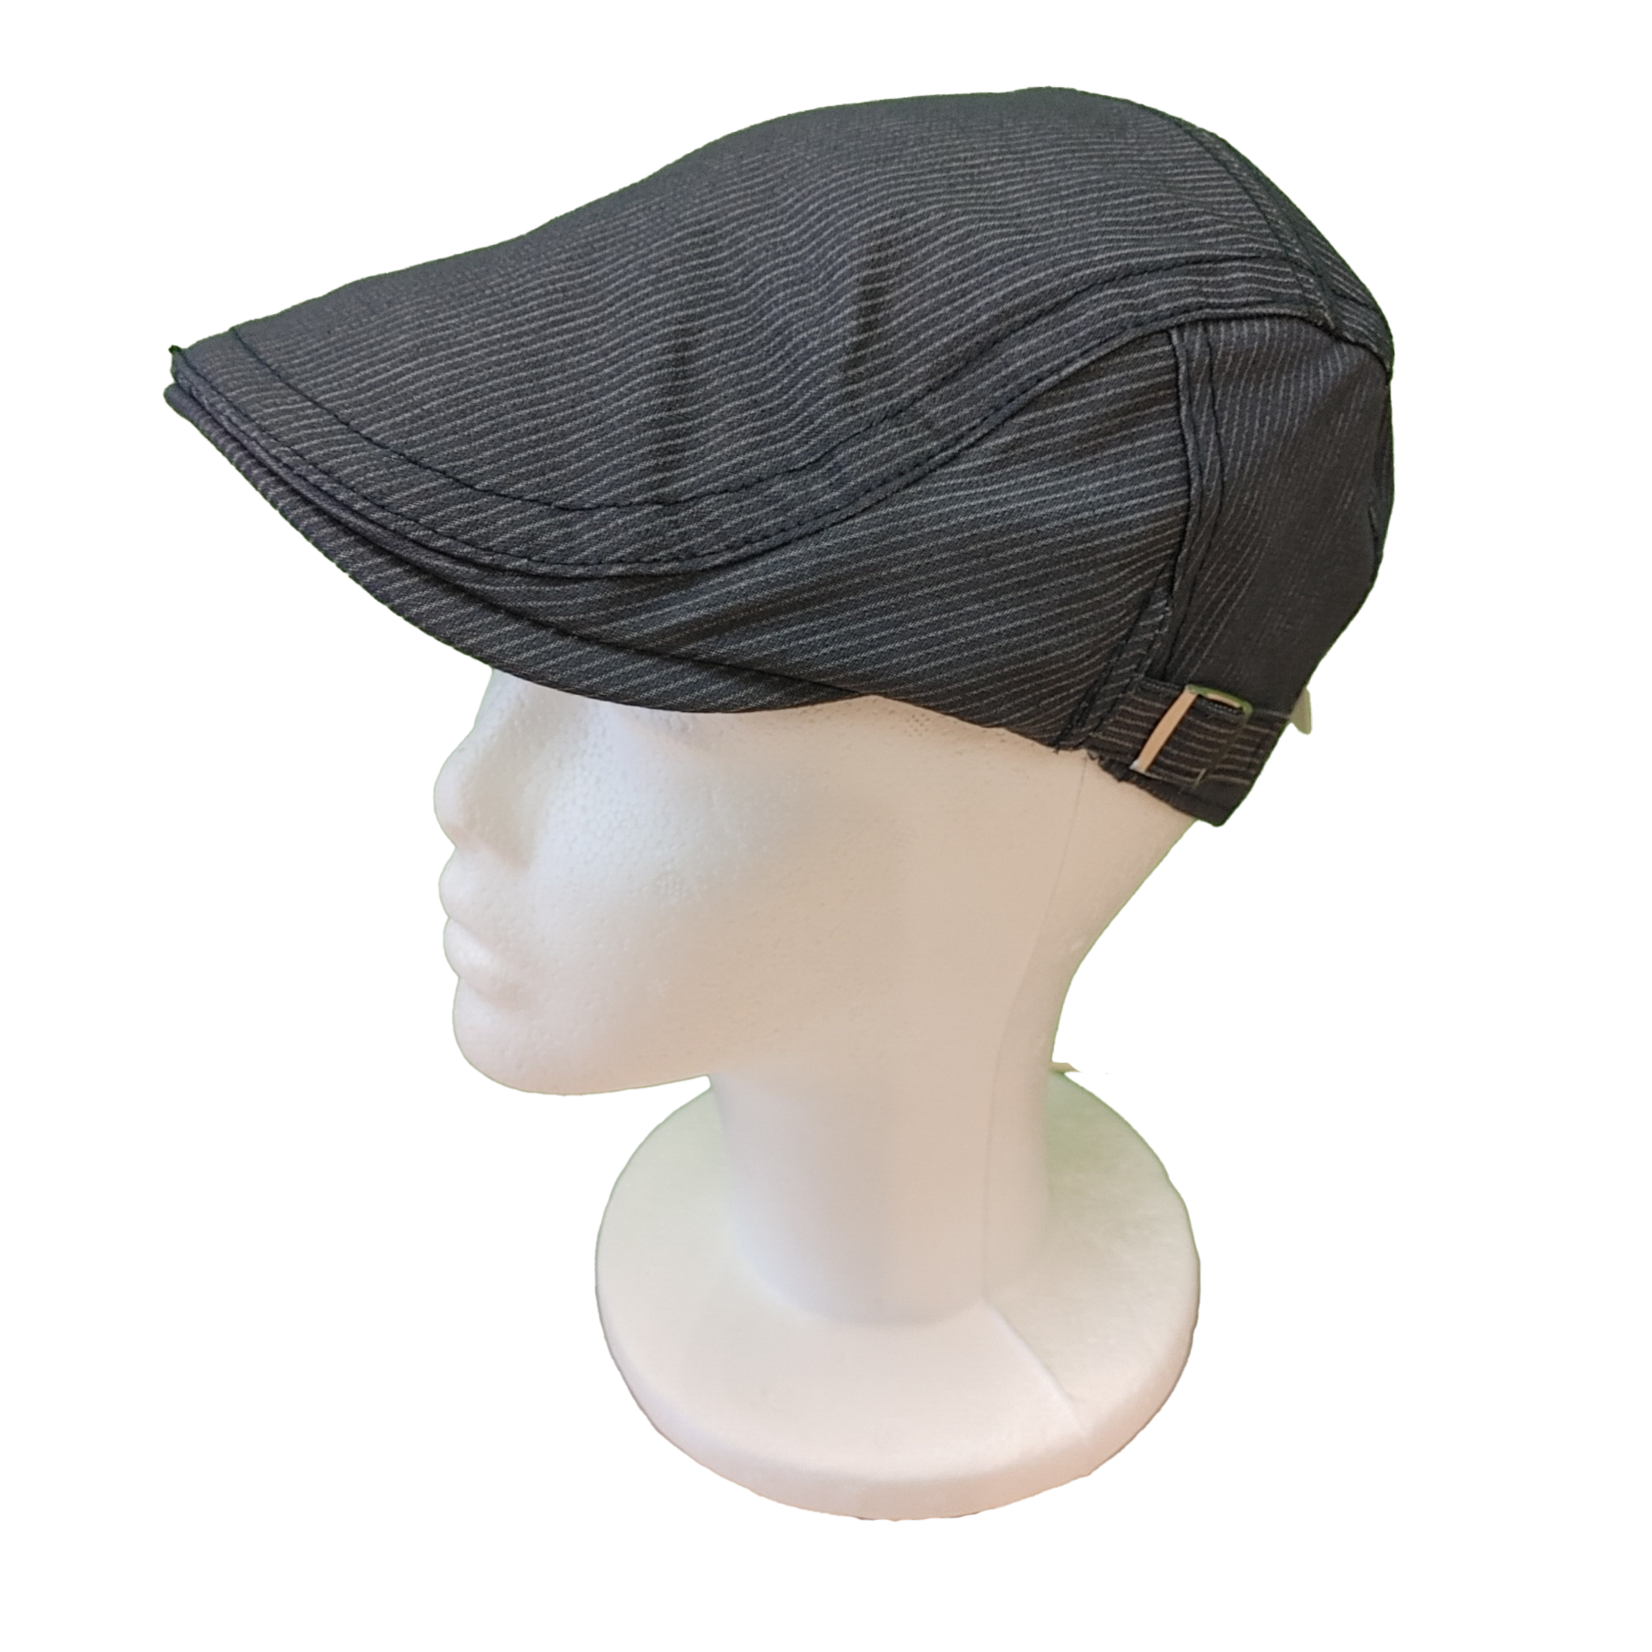 Picabo Picabo denim driving hat